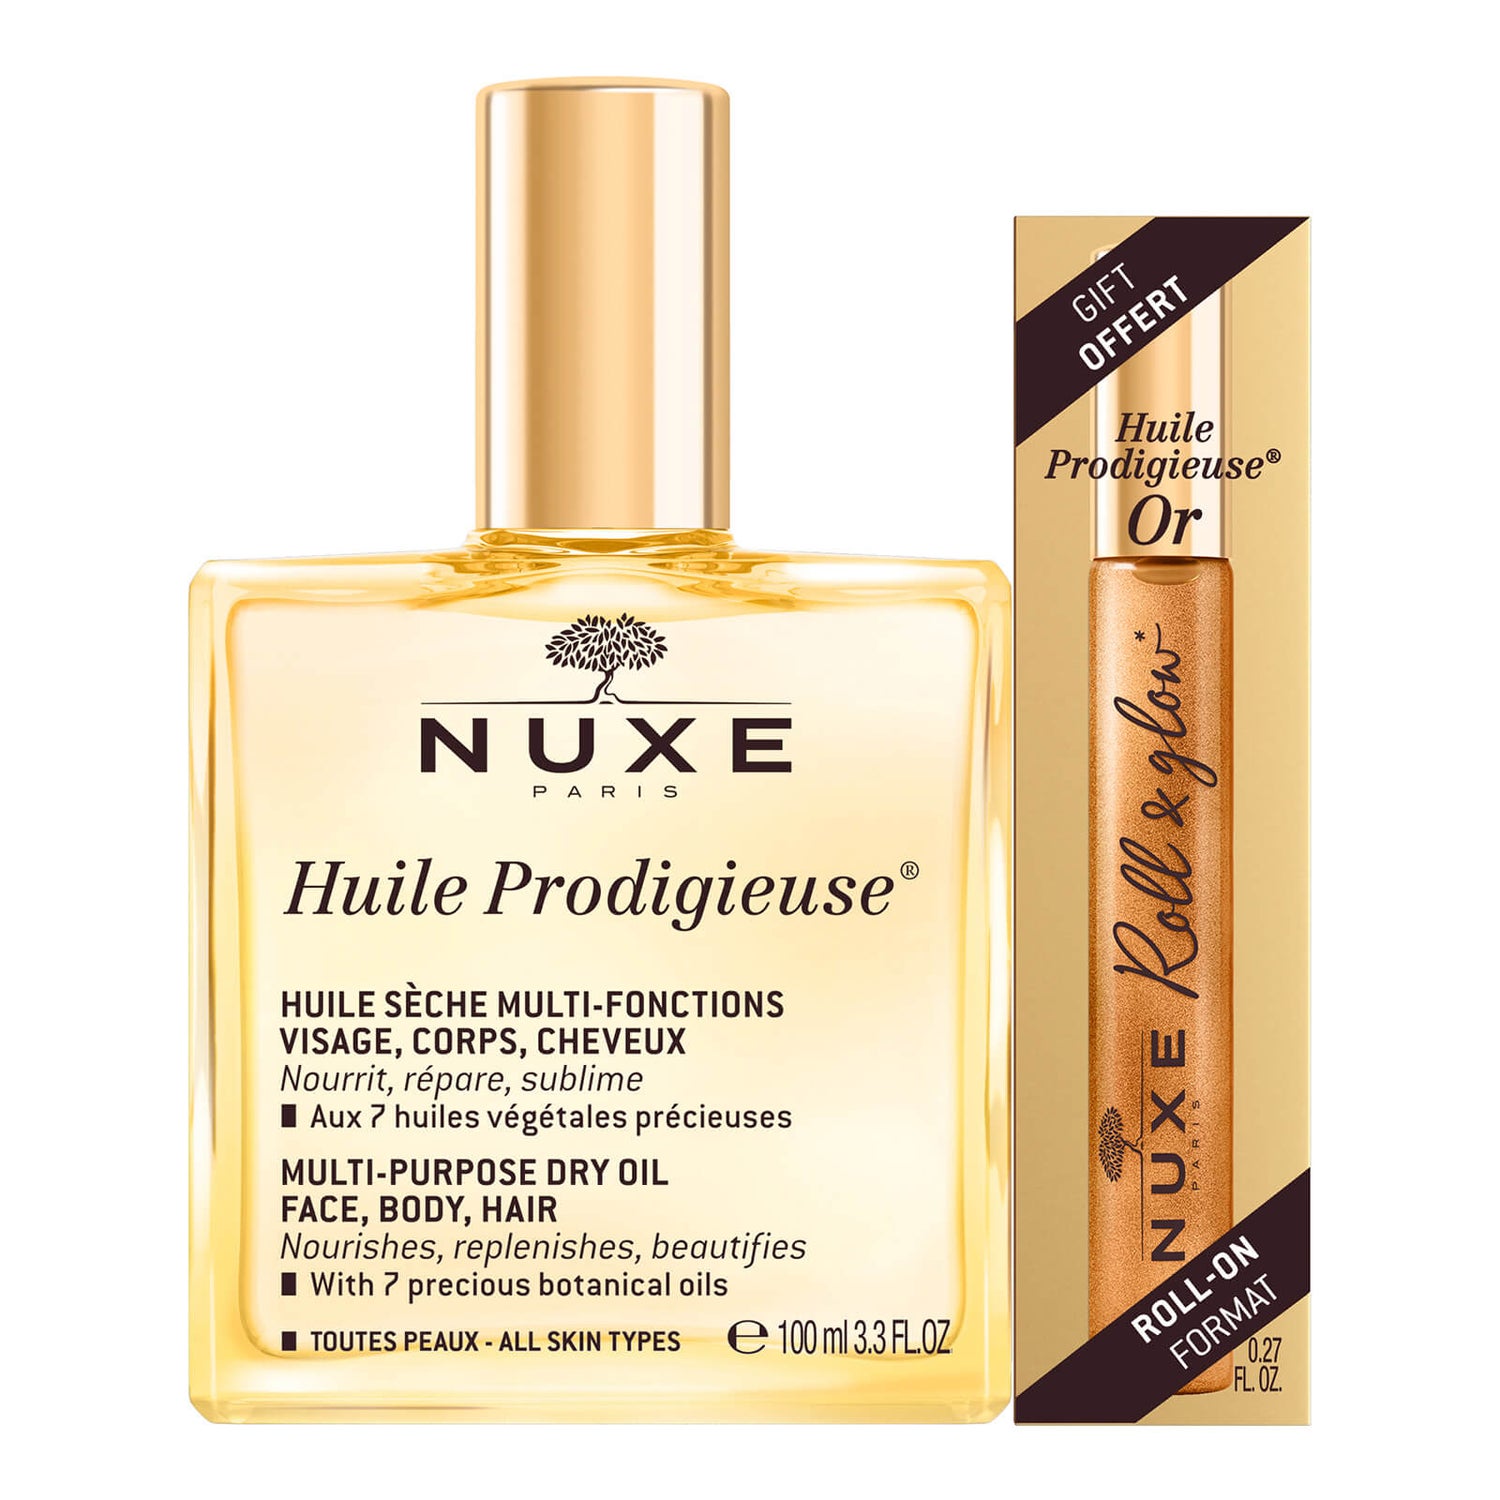 Huile Prodigieuse® 100ml & Huile Prodigieuse® Or 8ml in a free Roll-on format